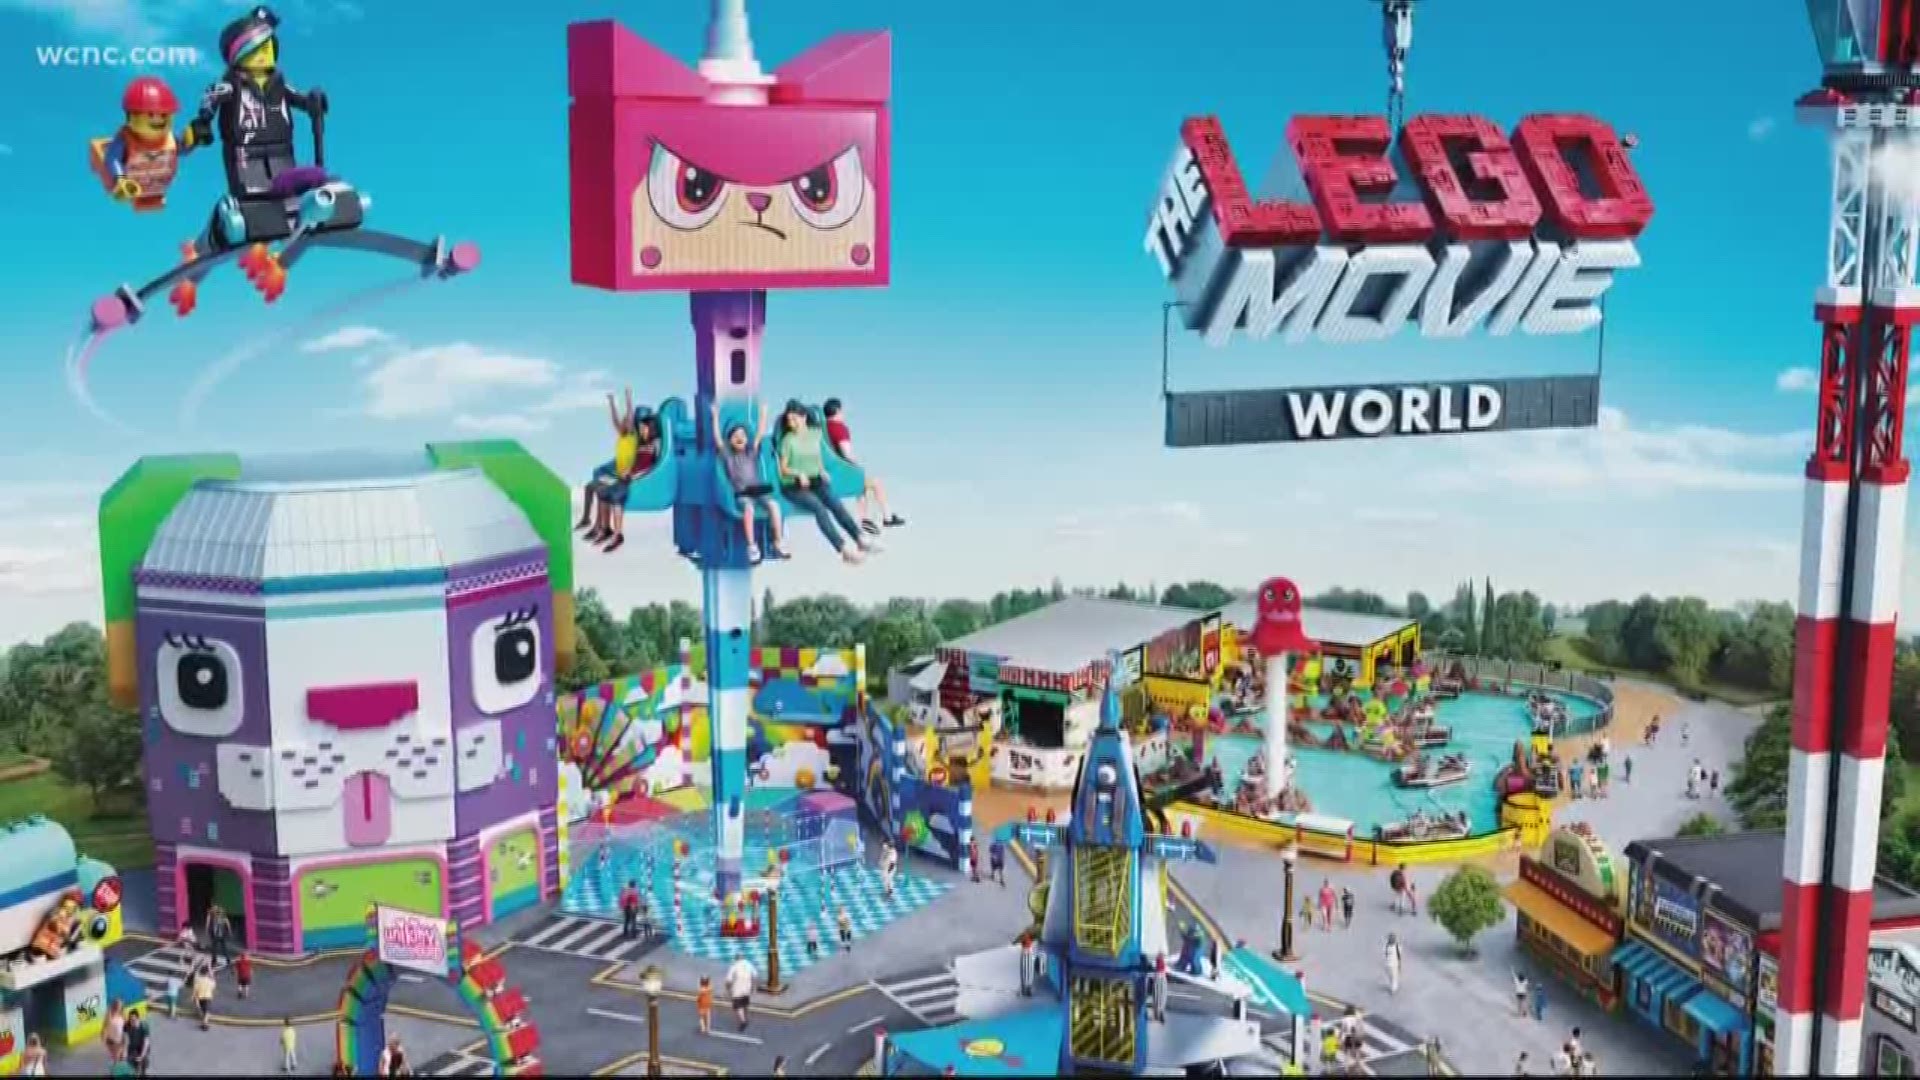 Looking for a fun vacation for the whole family? Head to Legoland in Orlando, Florida to check out their brand new Lego Movie World opening this March.